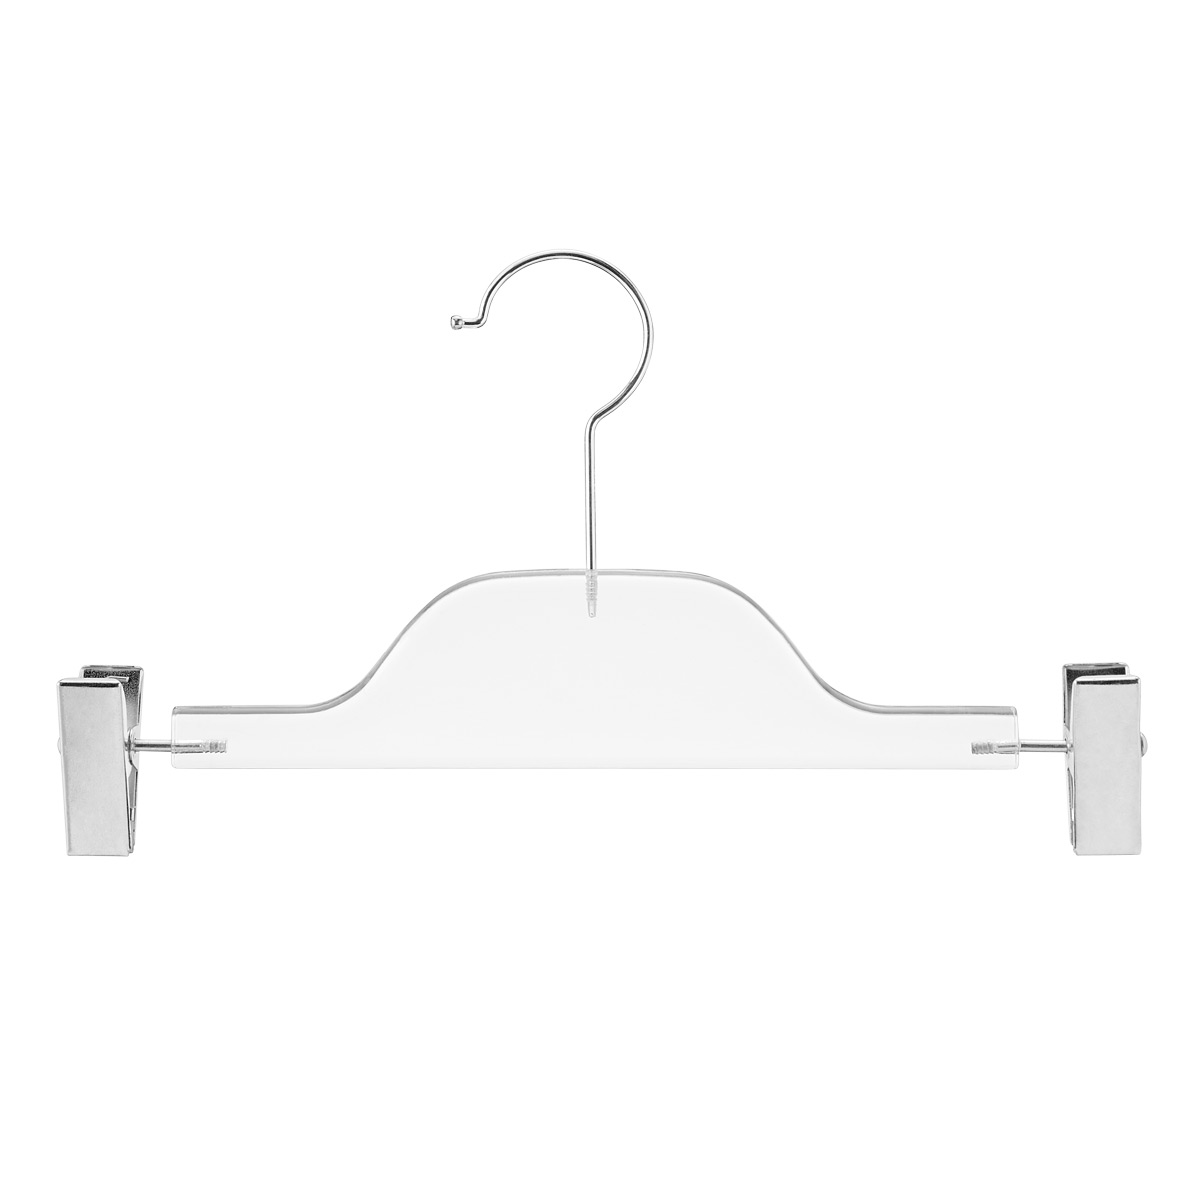 https://www.containerstore.com/catalogimages/420801/10082961_kids_clear_slim_hanger_with.jpg